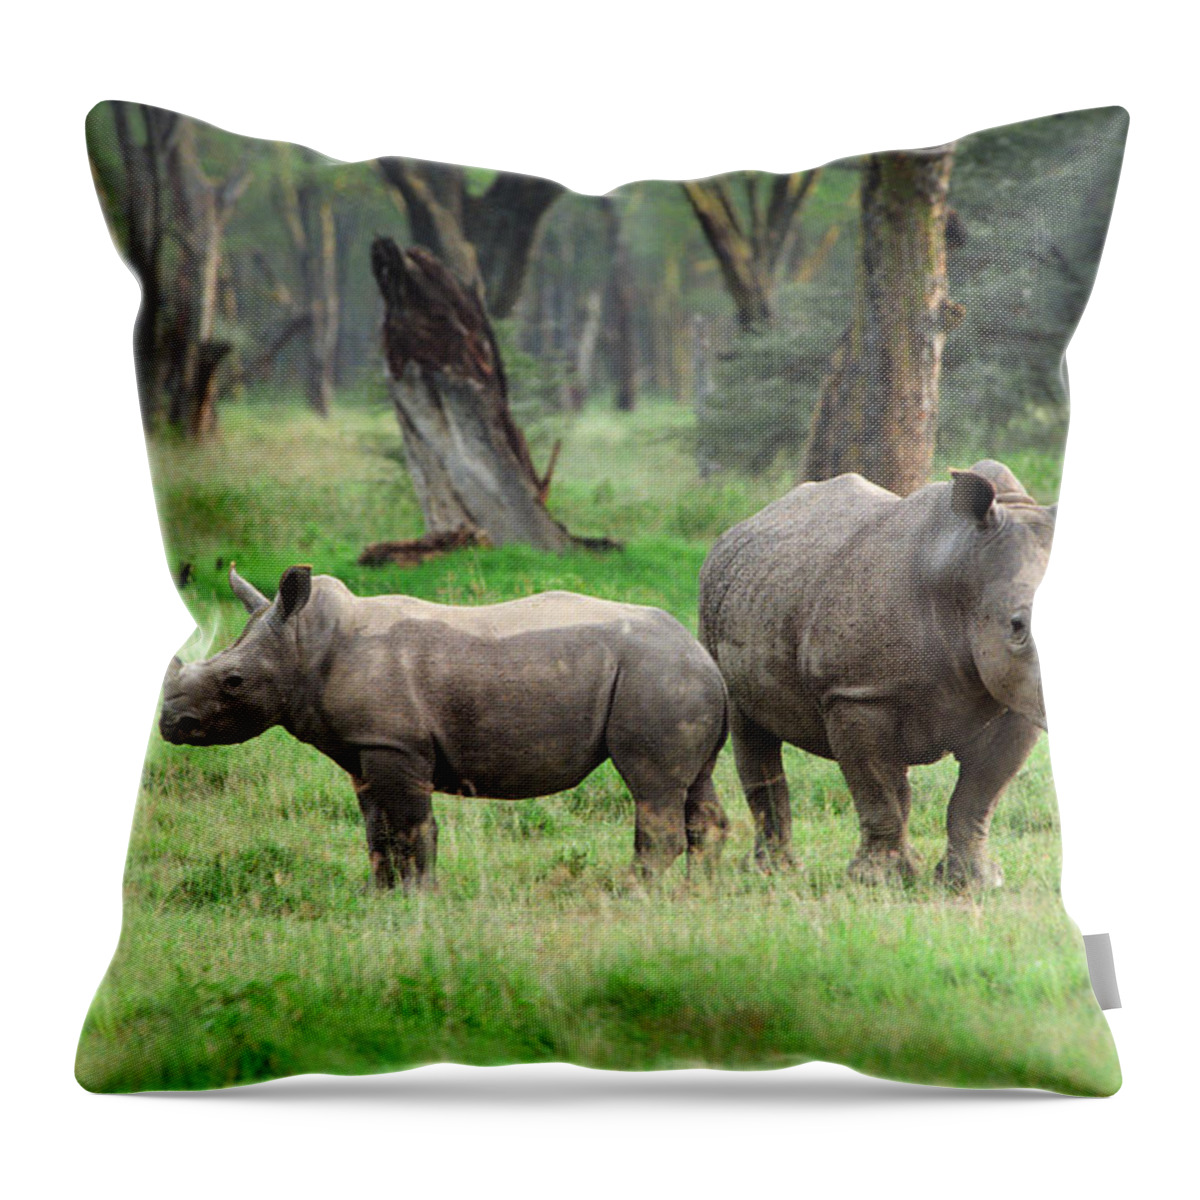 Africa Throw Pillow featuring the photograph Rhino Family by Sebastian Musial